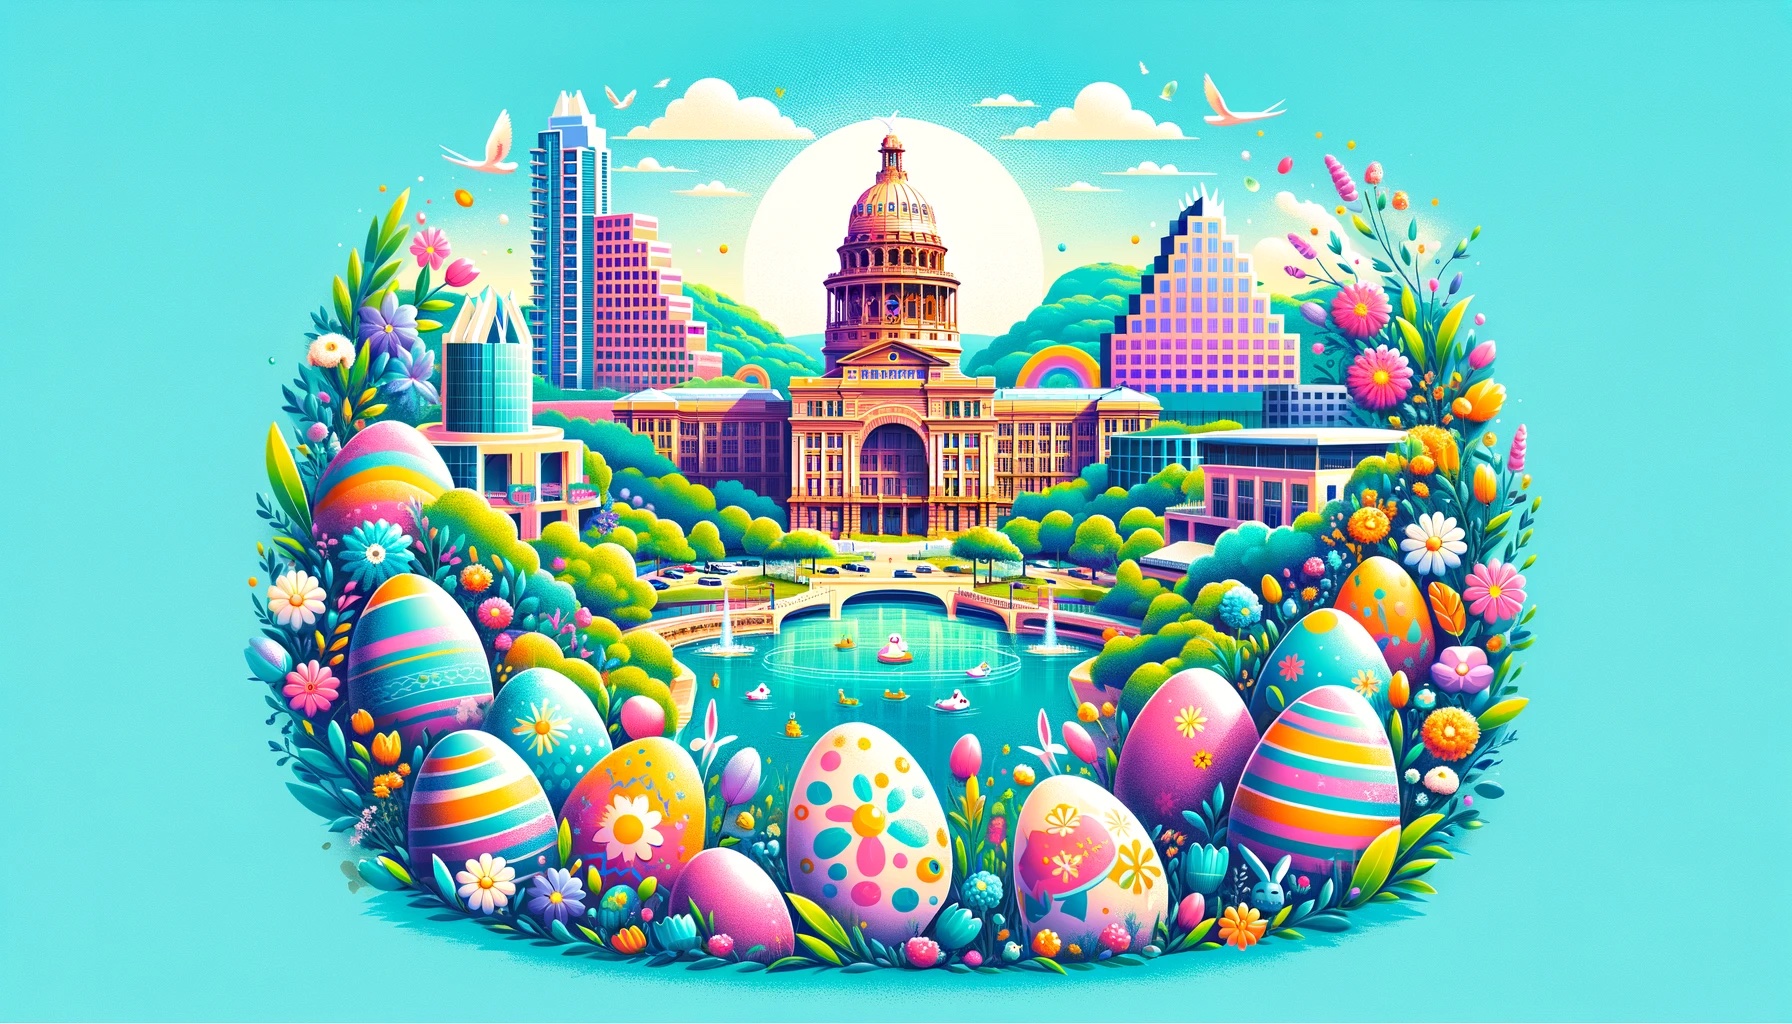 Image of Austin Texas with many easter eggs.